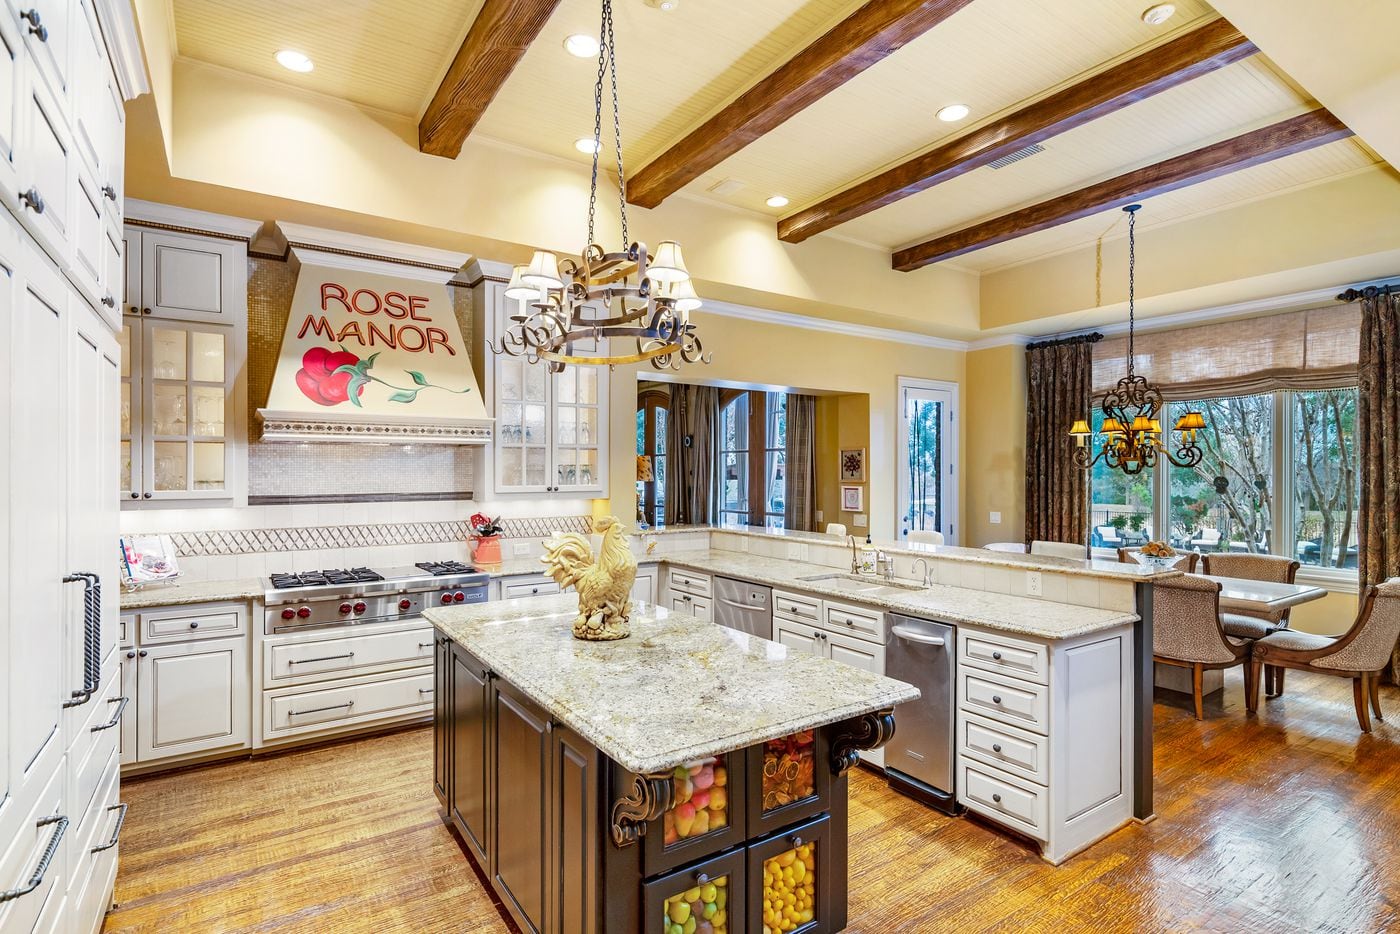 Take a look inside the home at 15 Riva Ridge in Frisco, TX.